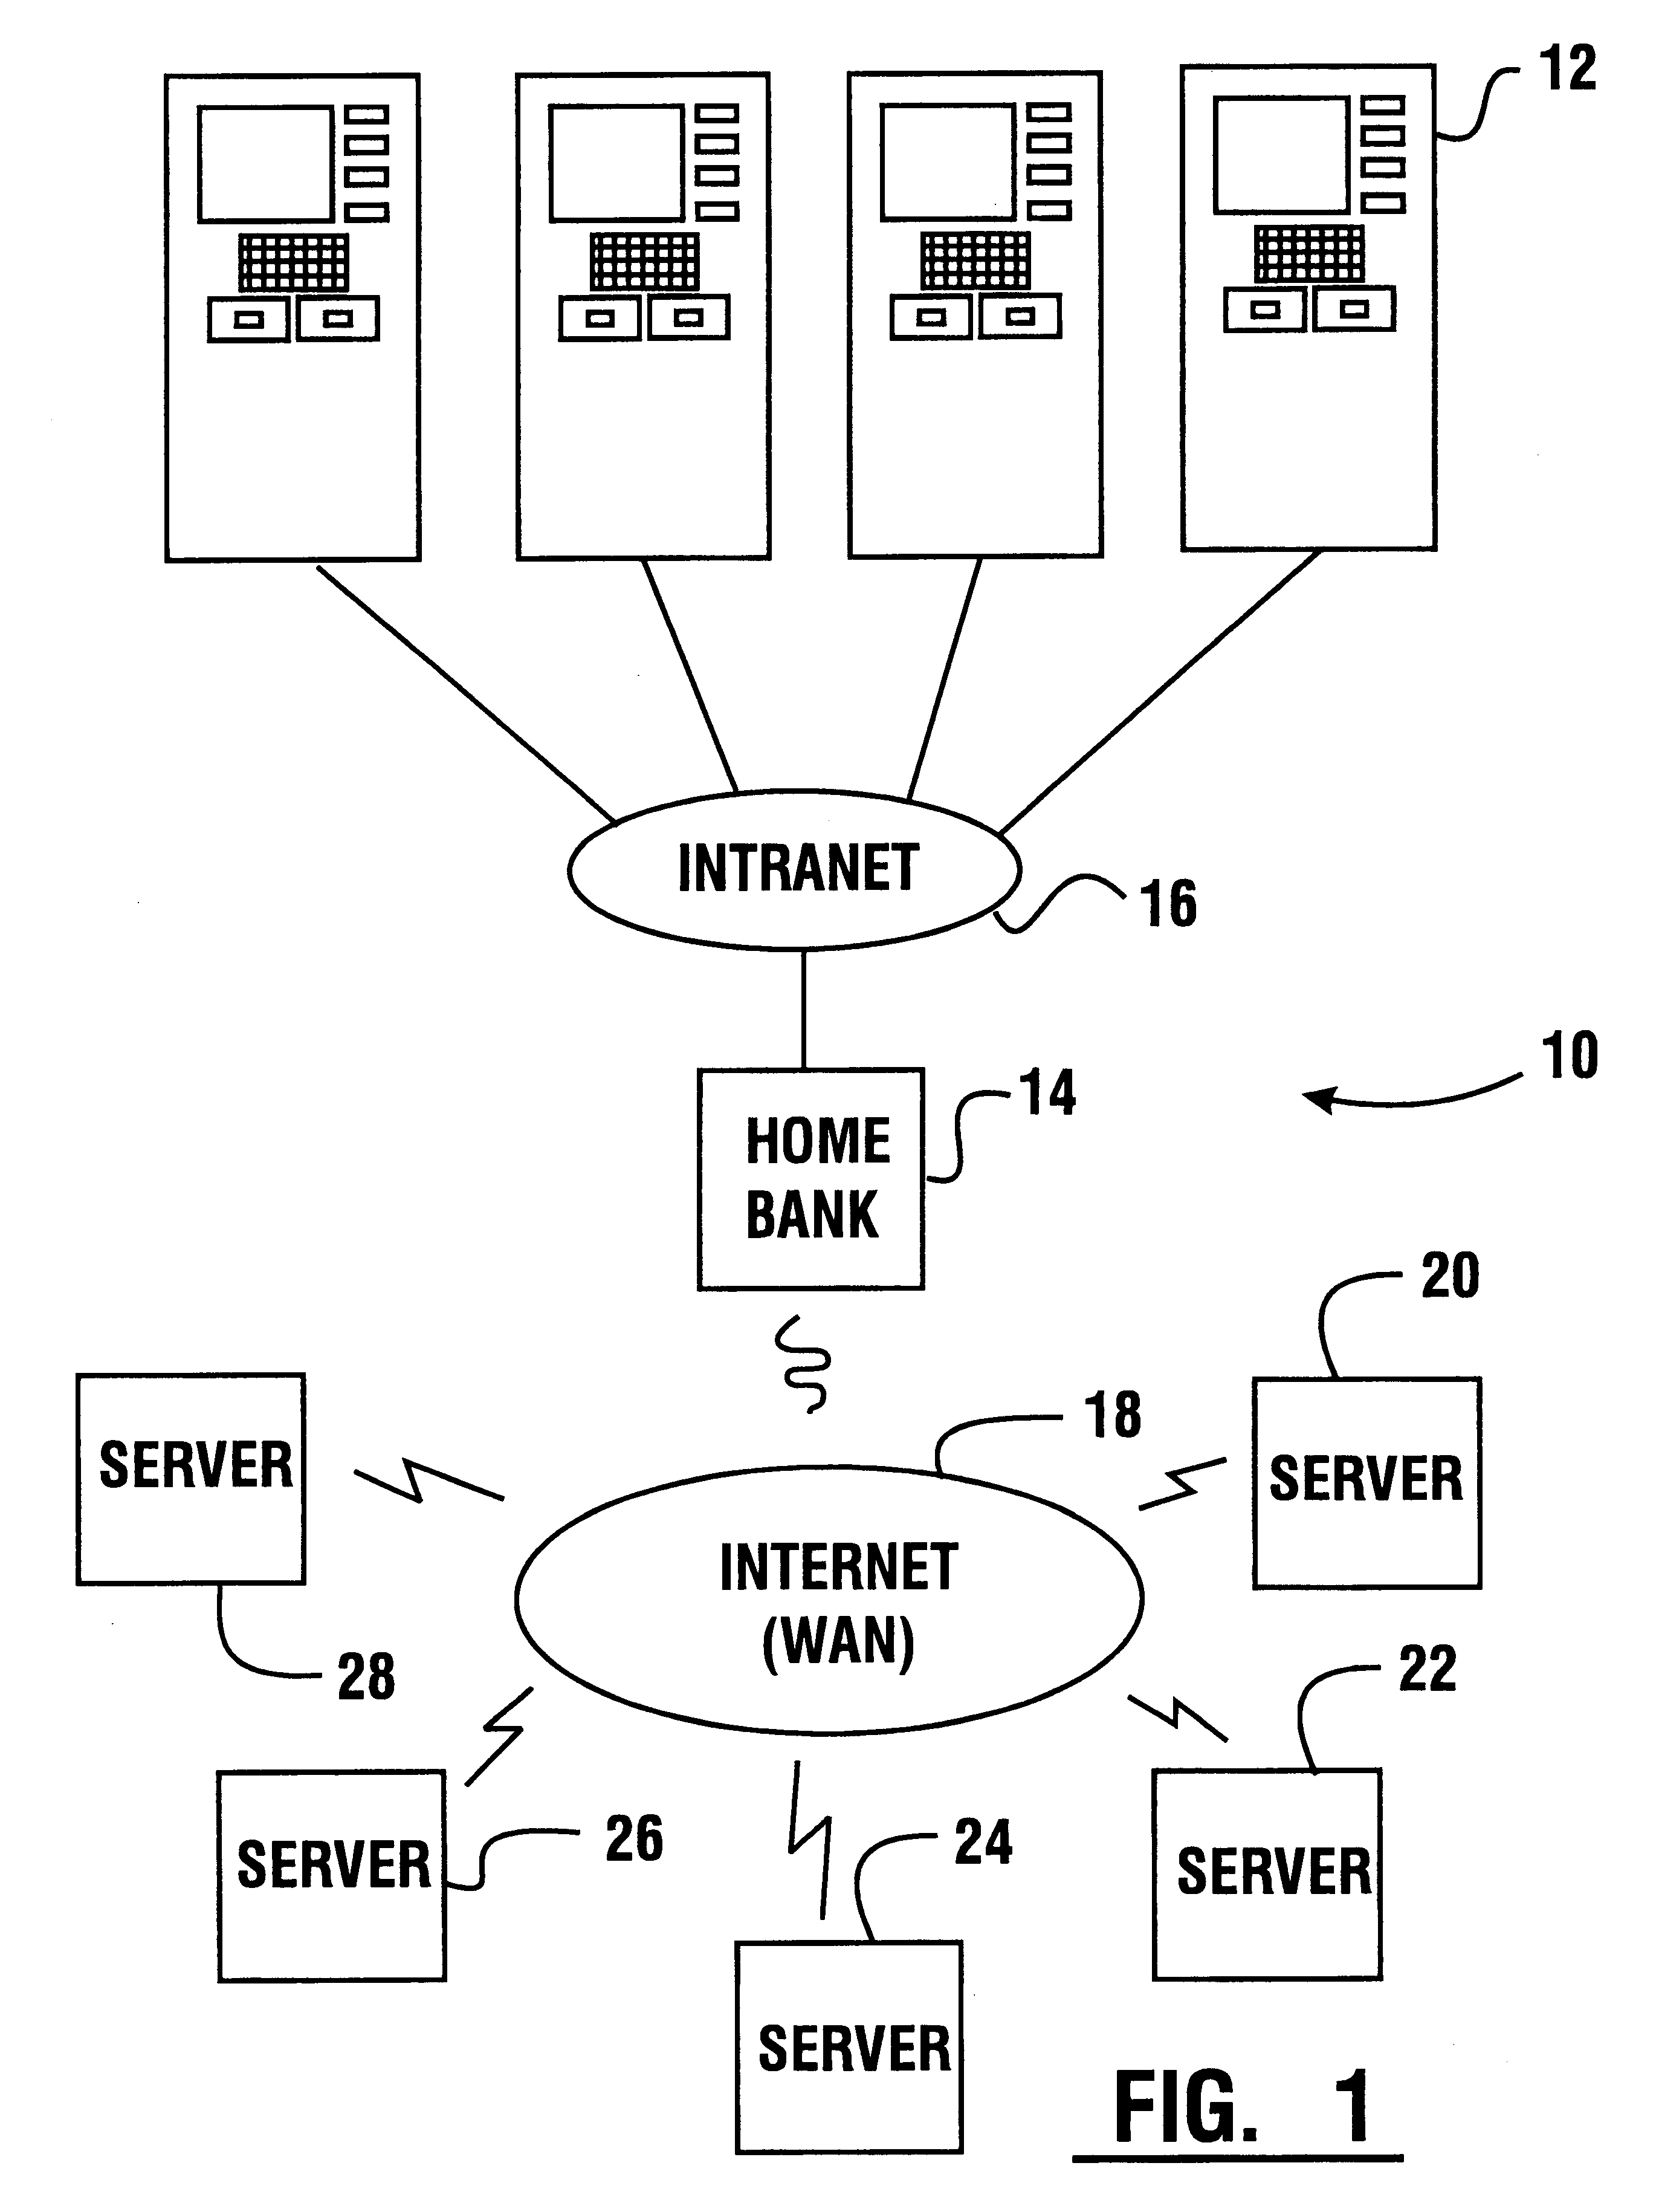 Automated banking machine apparatus and system